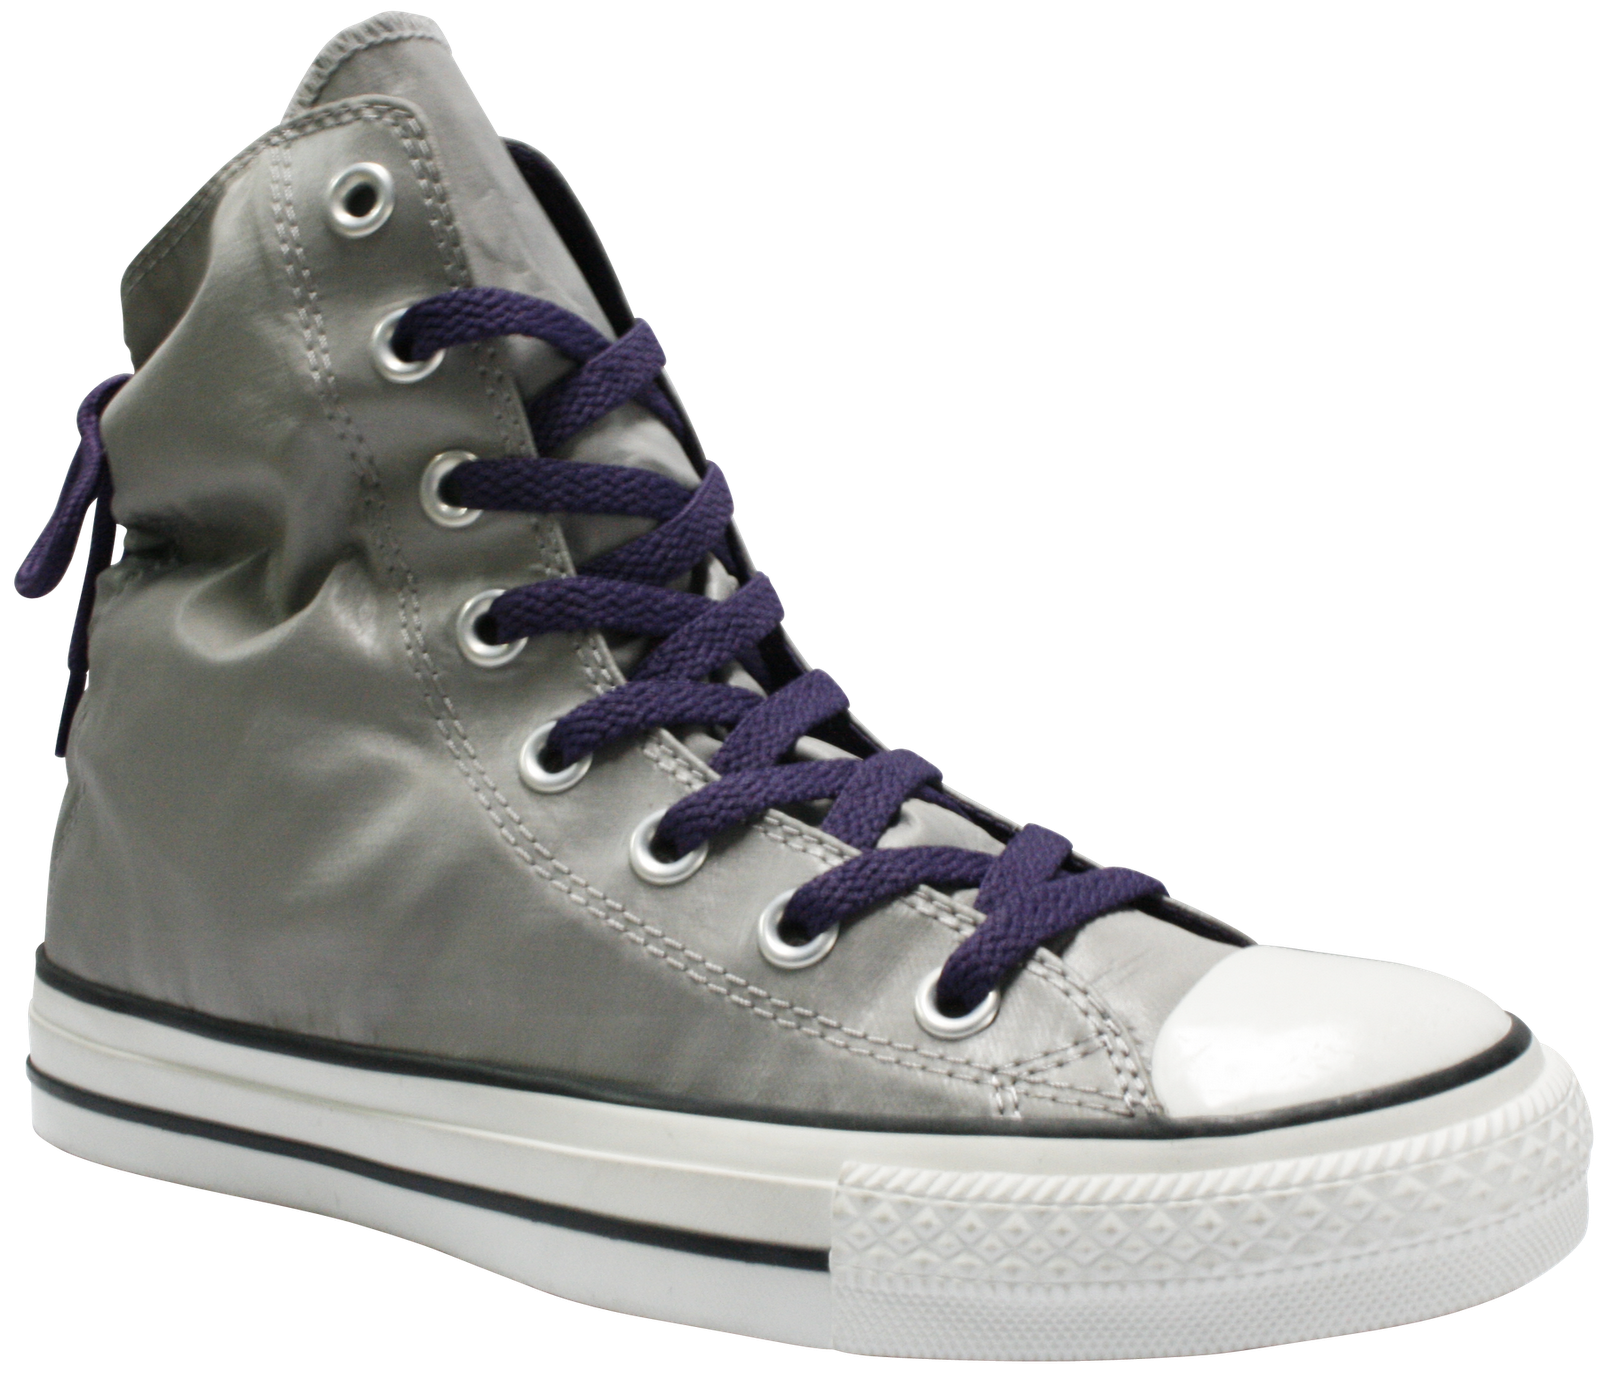 Converse Philippines: Lady Friday - Understated Gray